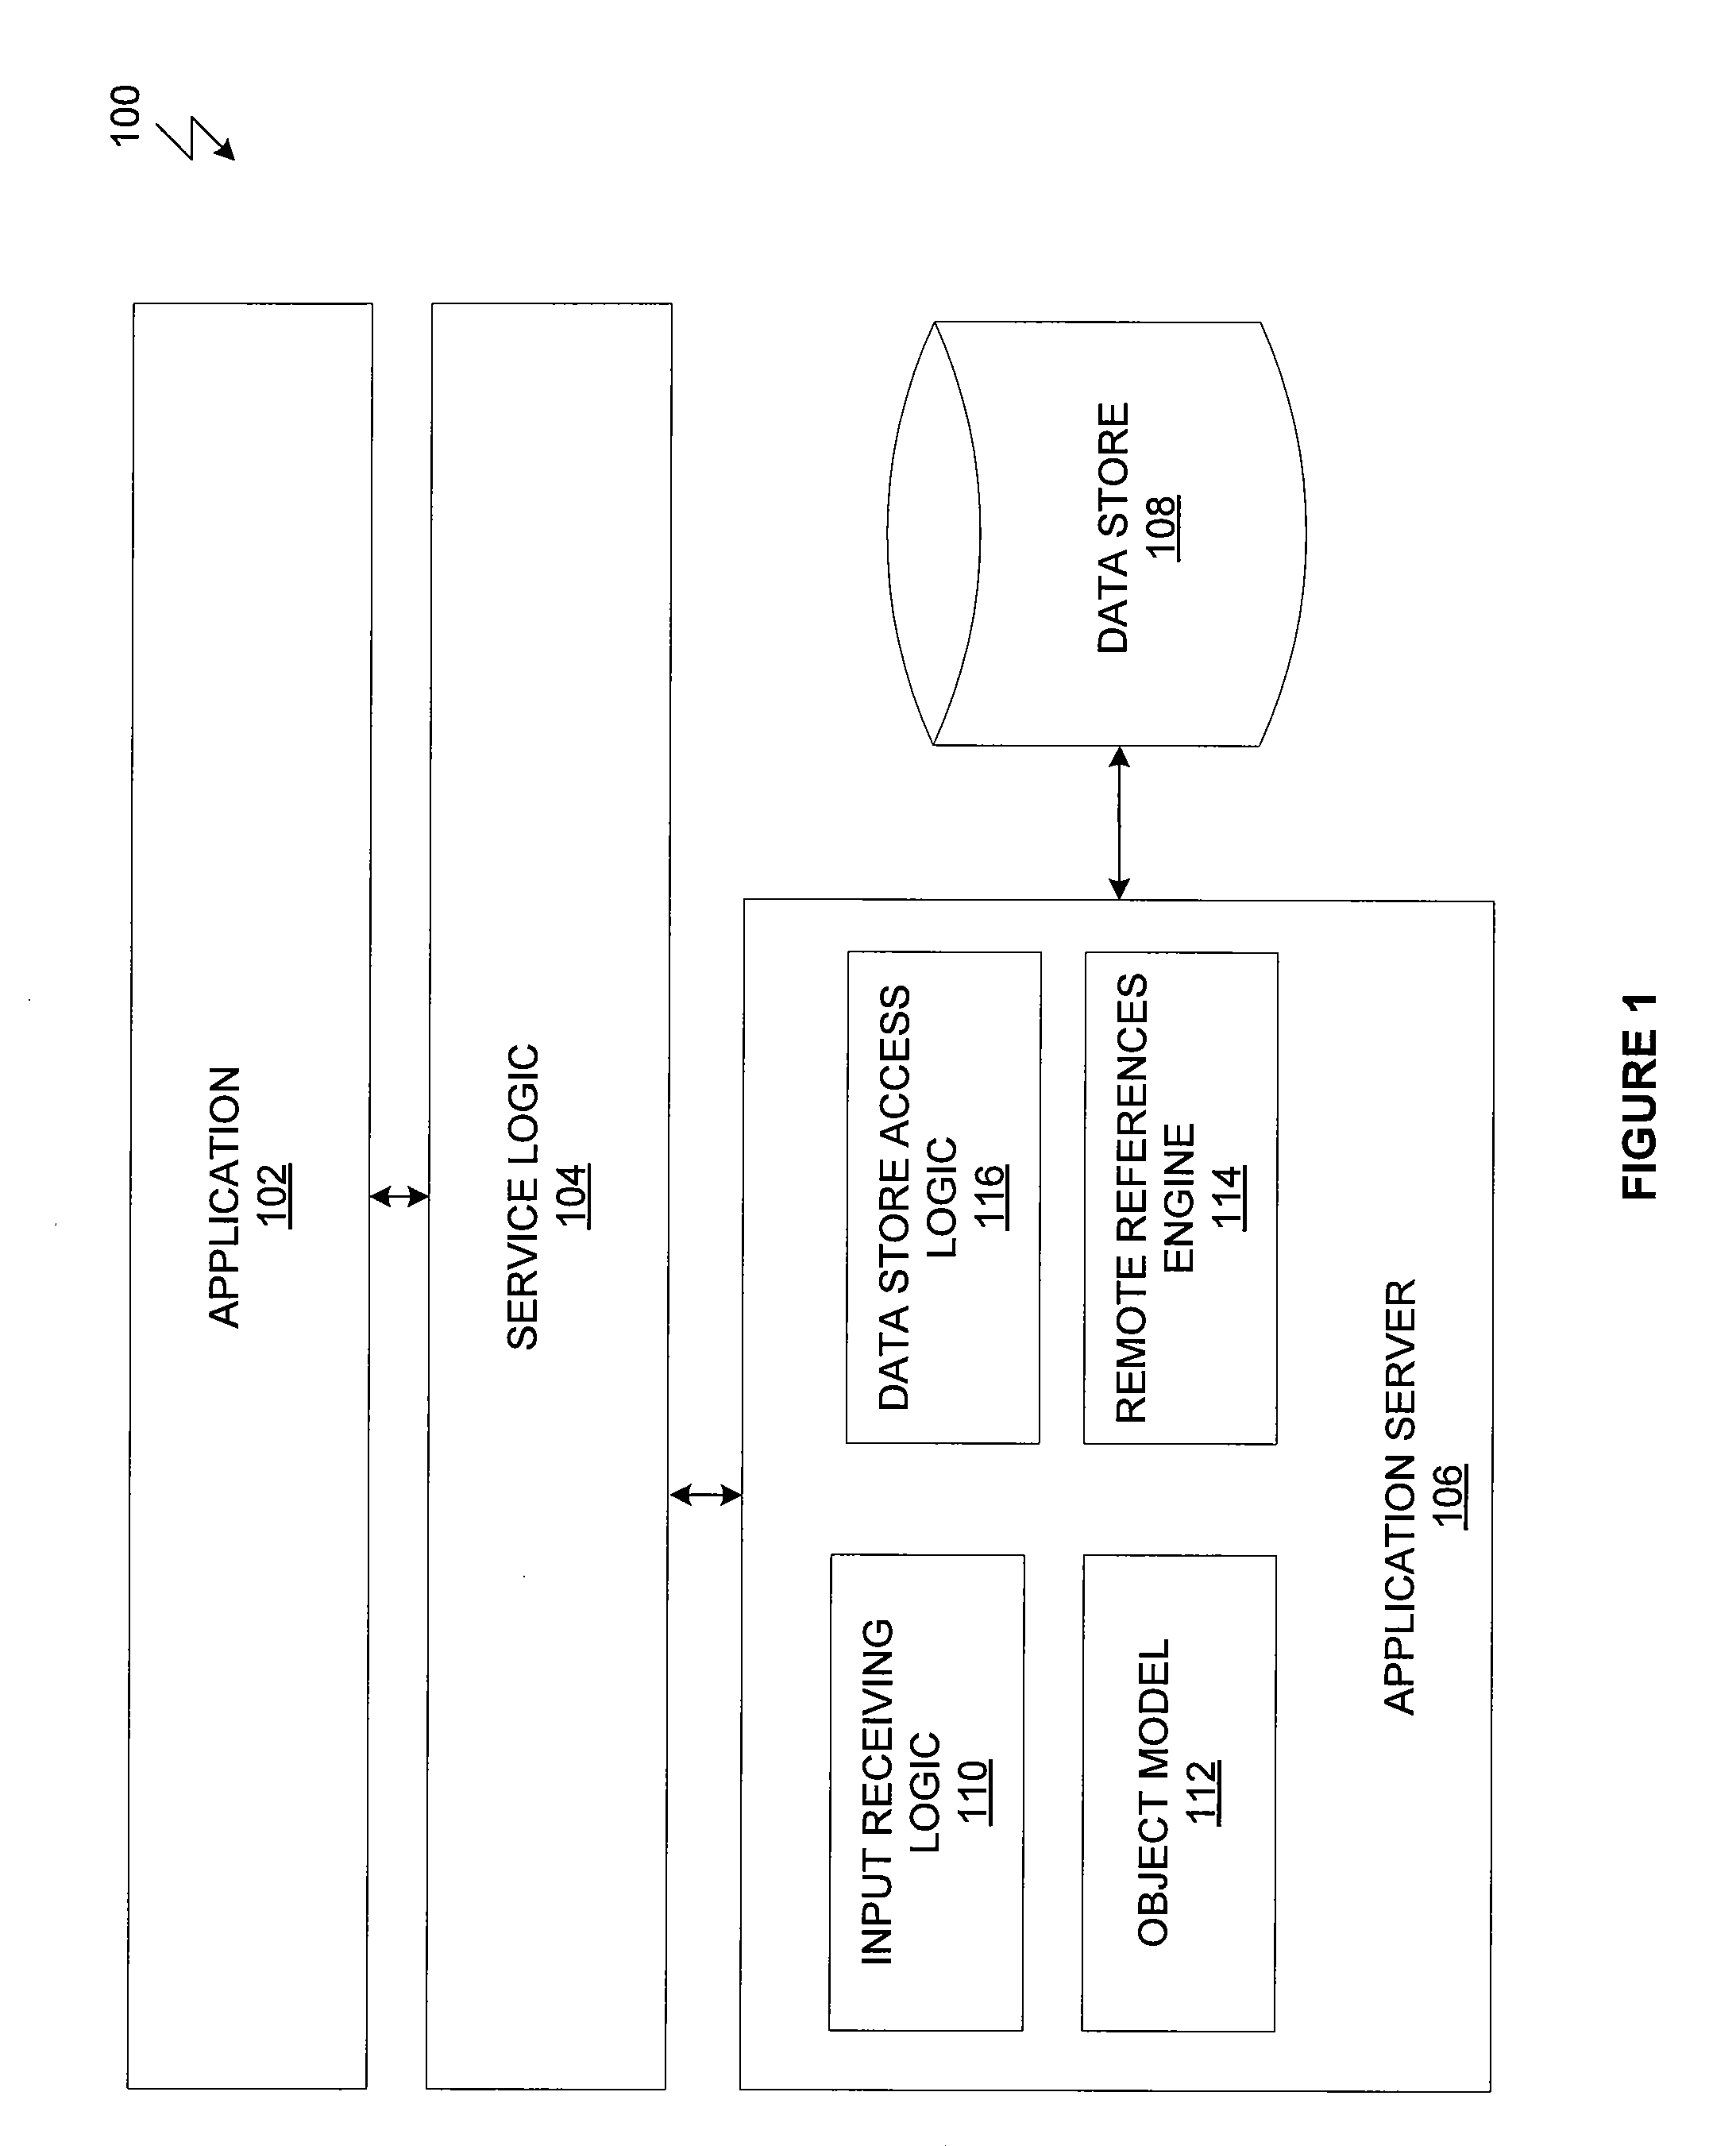 System and method for accessing data objects via remote references